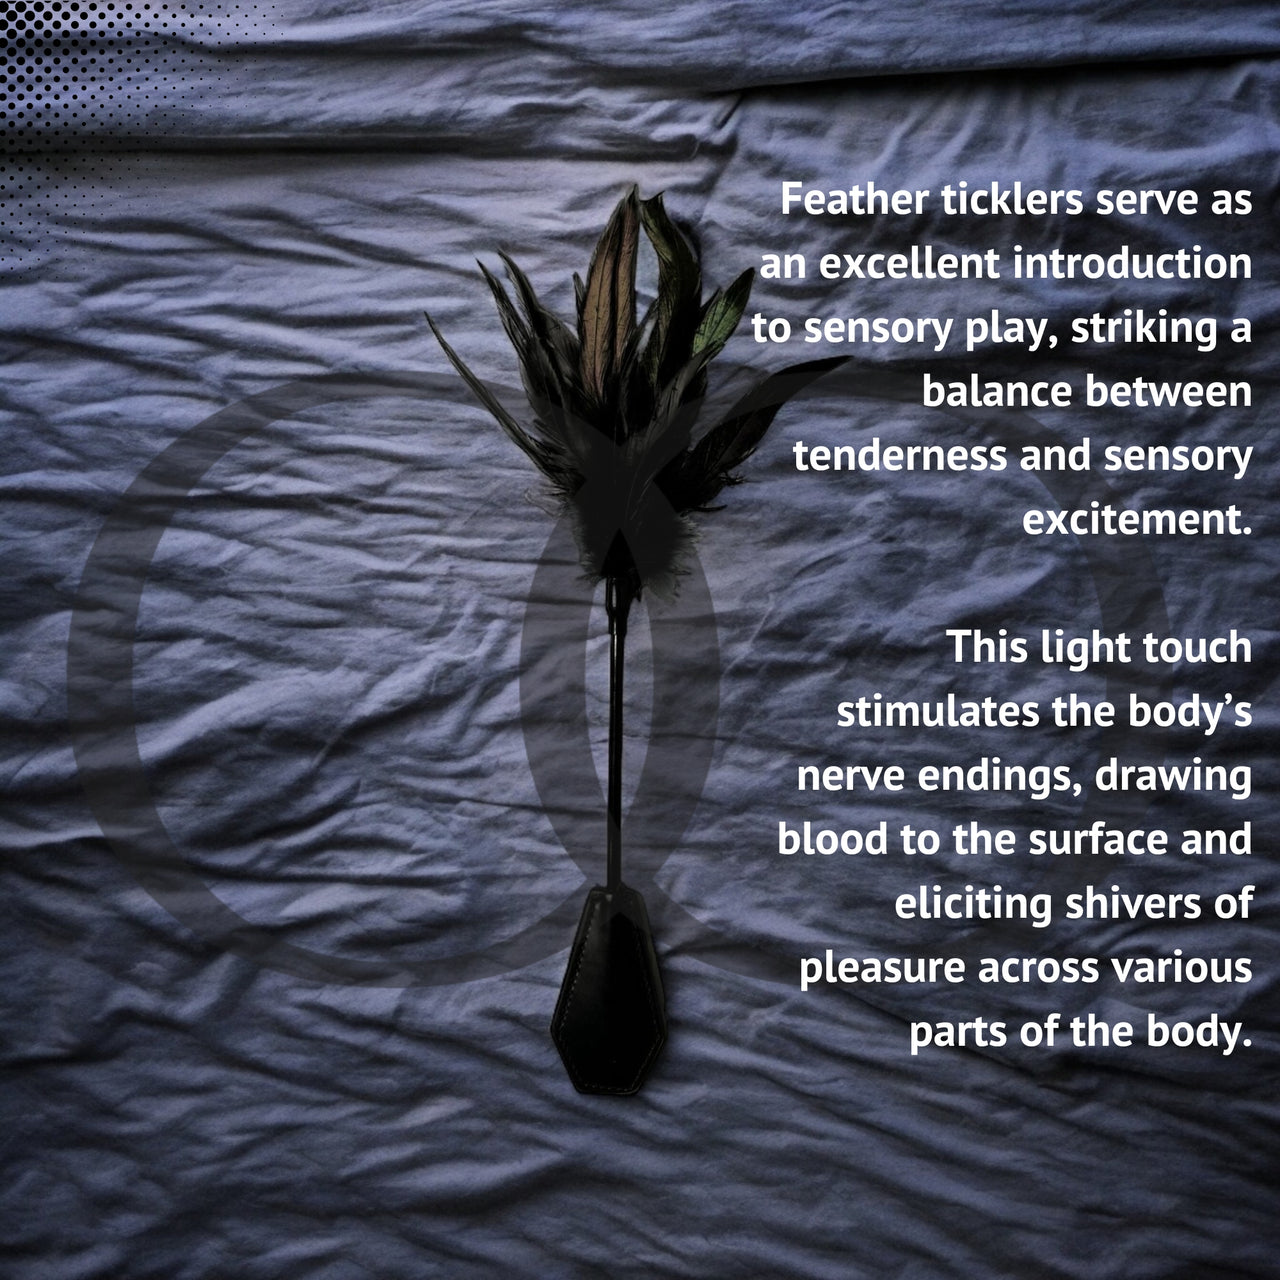 Dual Delight Black Feather & Leather Crop – Elegant Sensory Accessory for Playful Stimulation